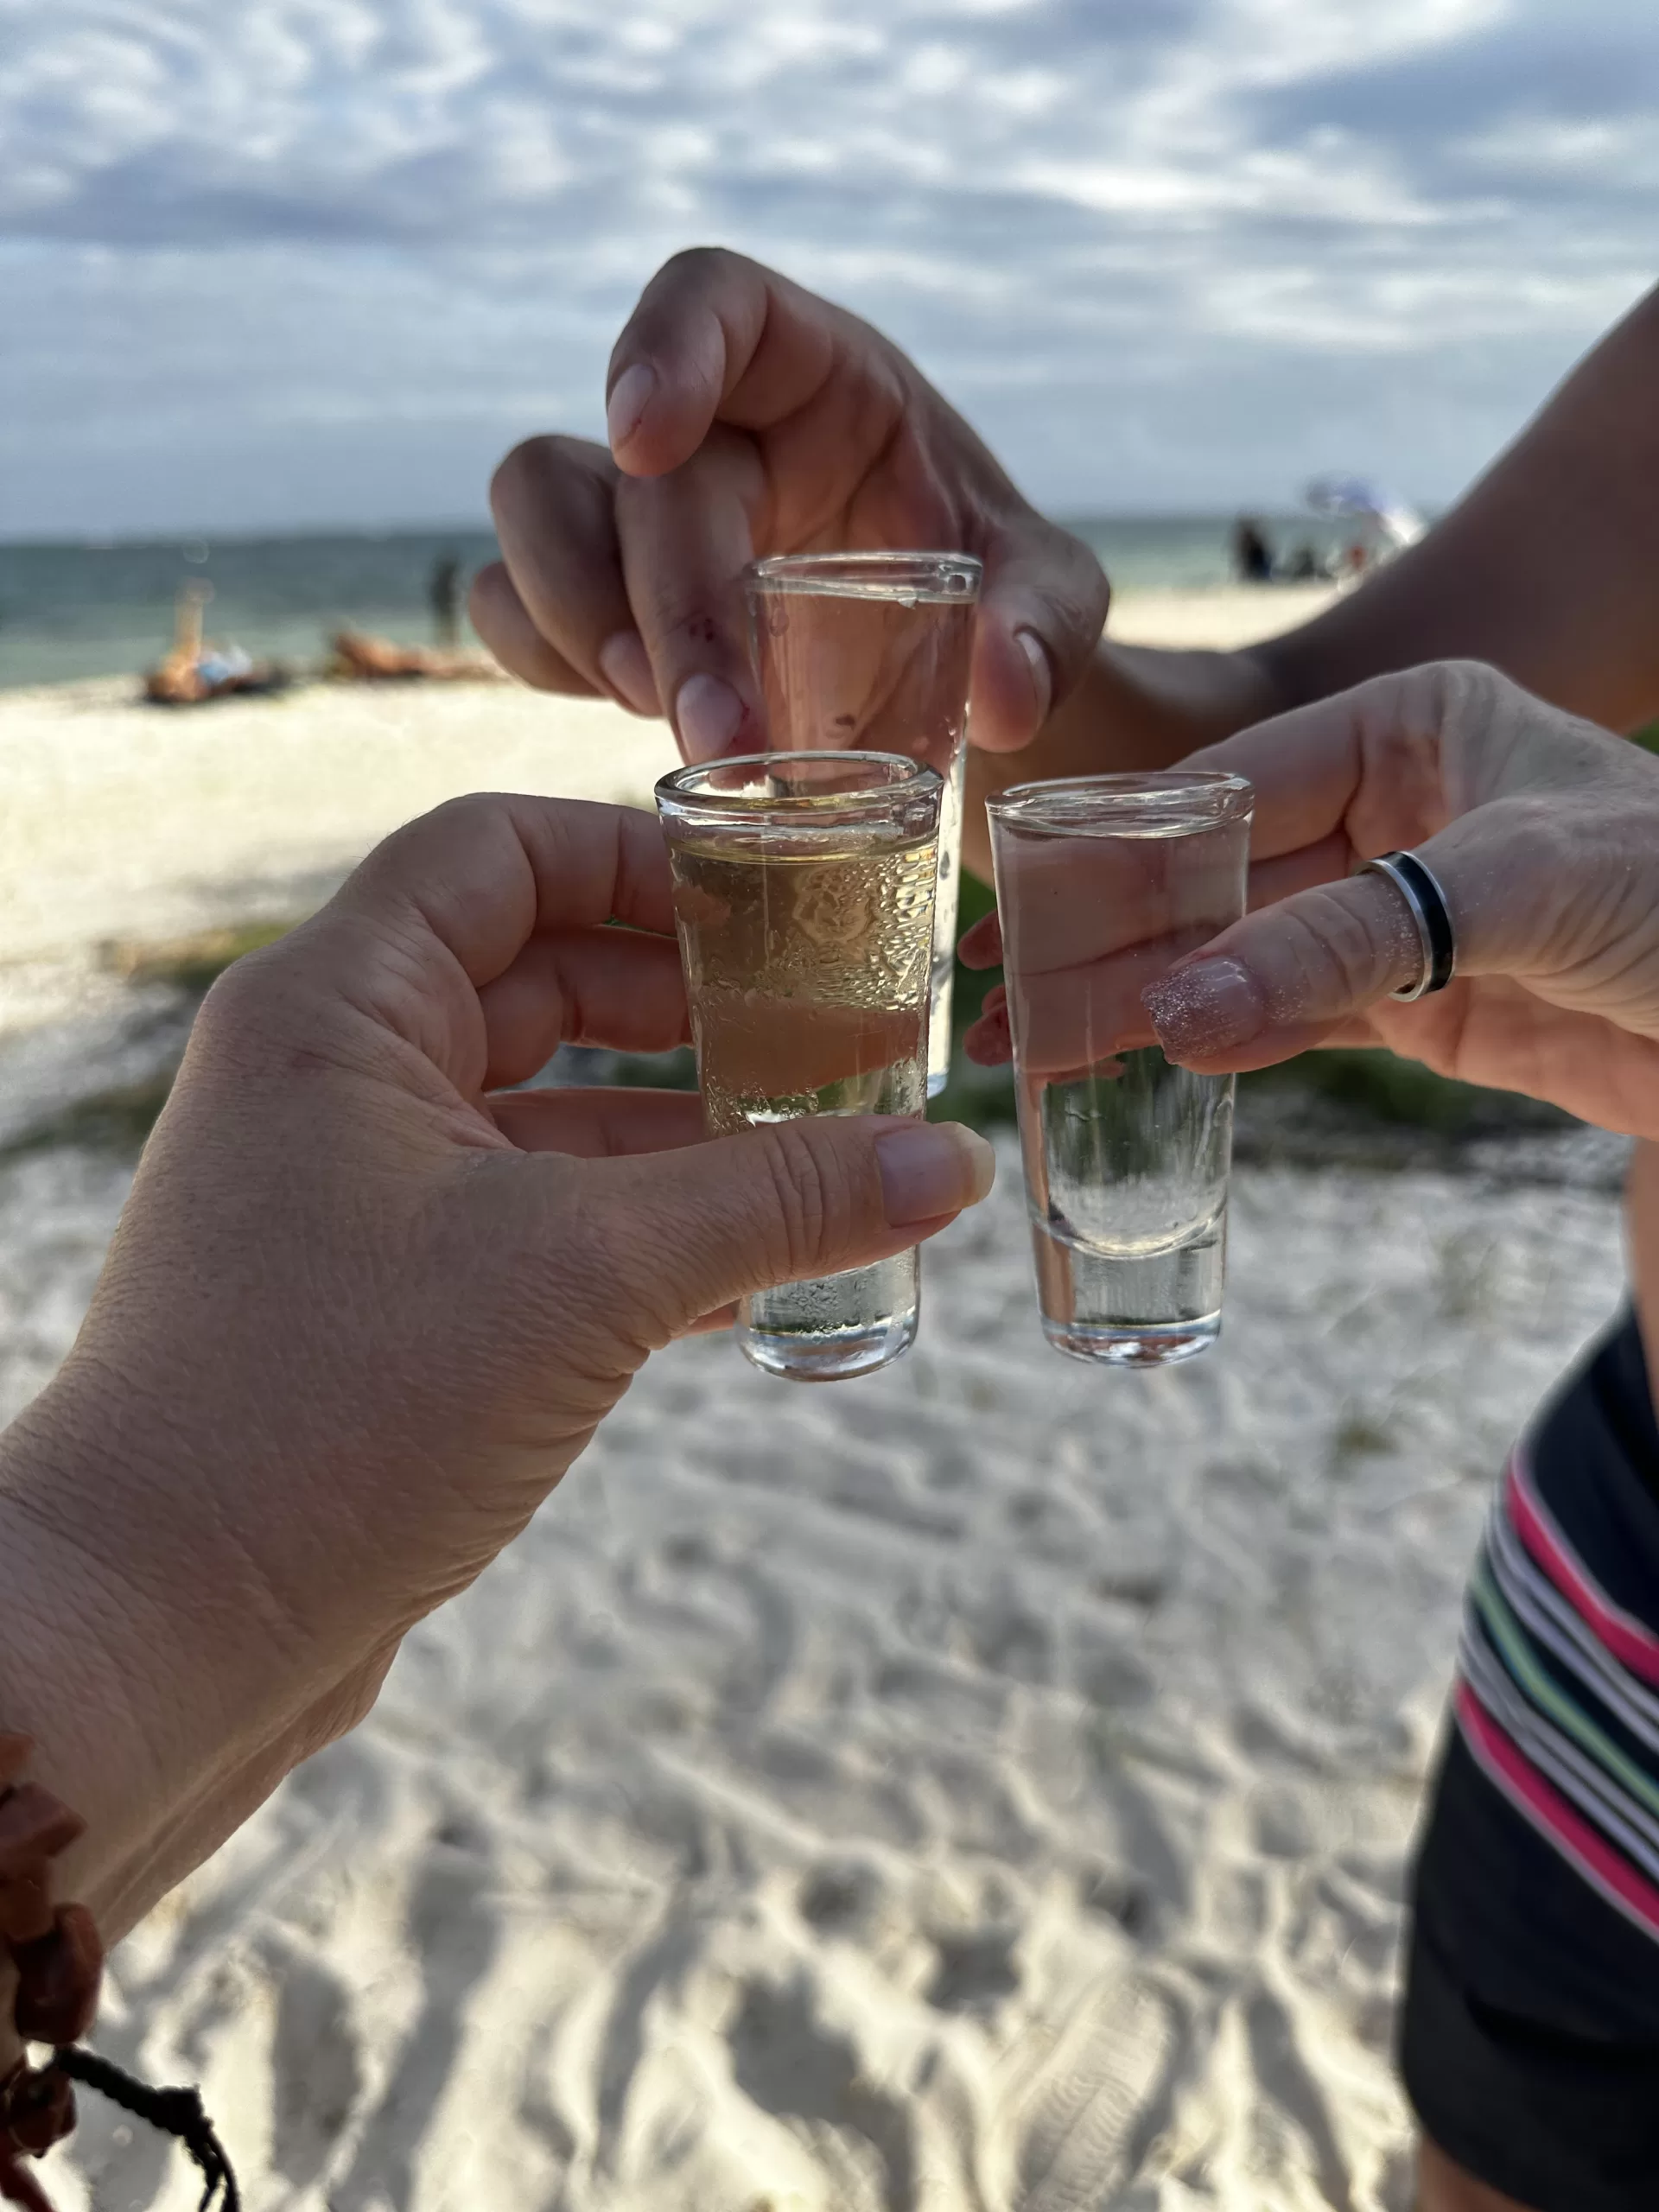 Three hands embrace shot glasses filled with golden tequila, capturing a moment of camaraderie and enjoyment against the backdrop of a sun-drenched beach.